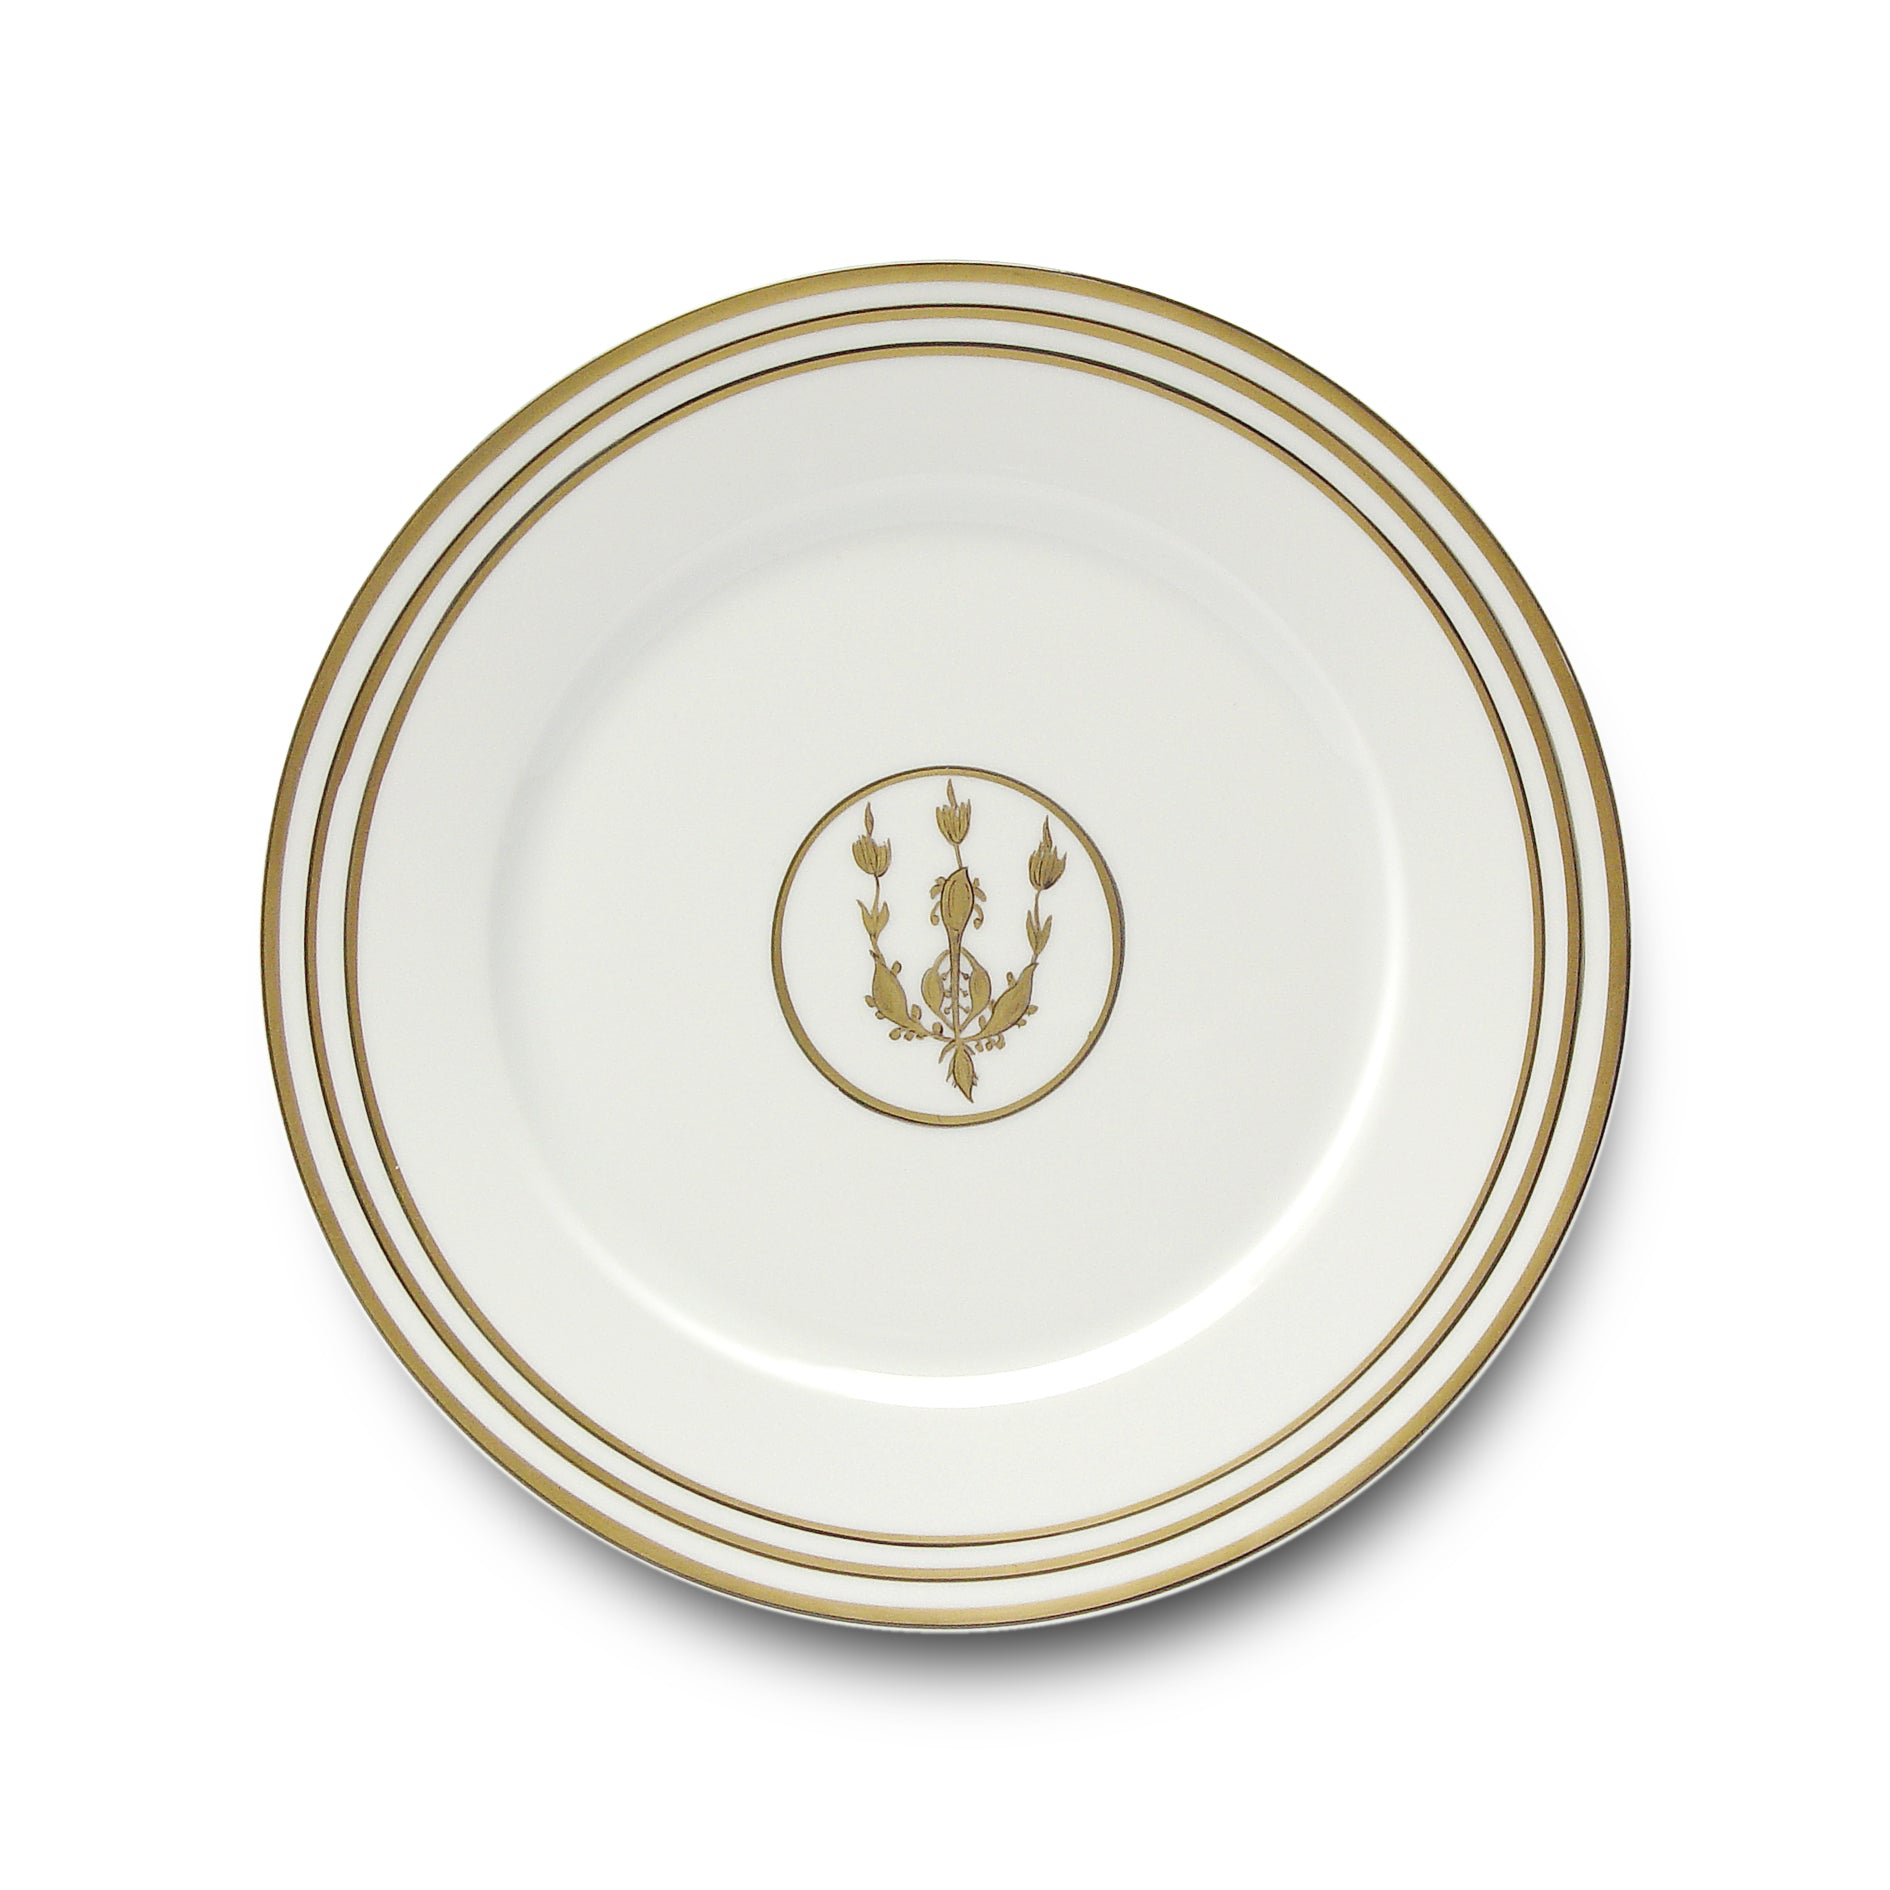 Or des Airs - Or des Mers - Dinner plate 01